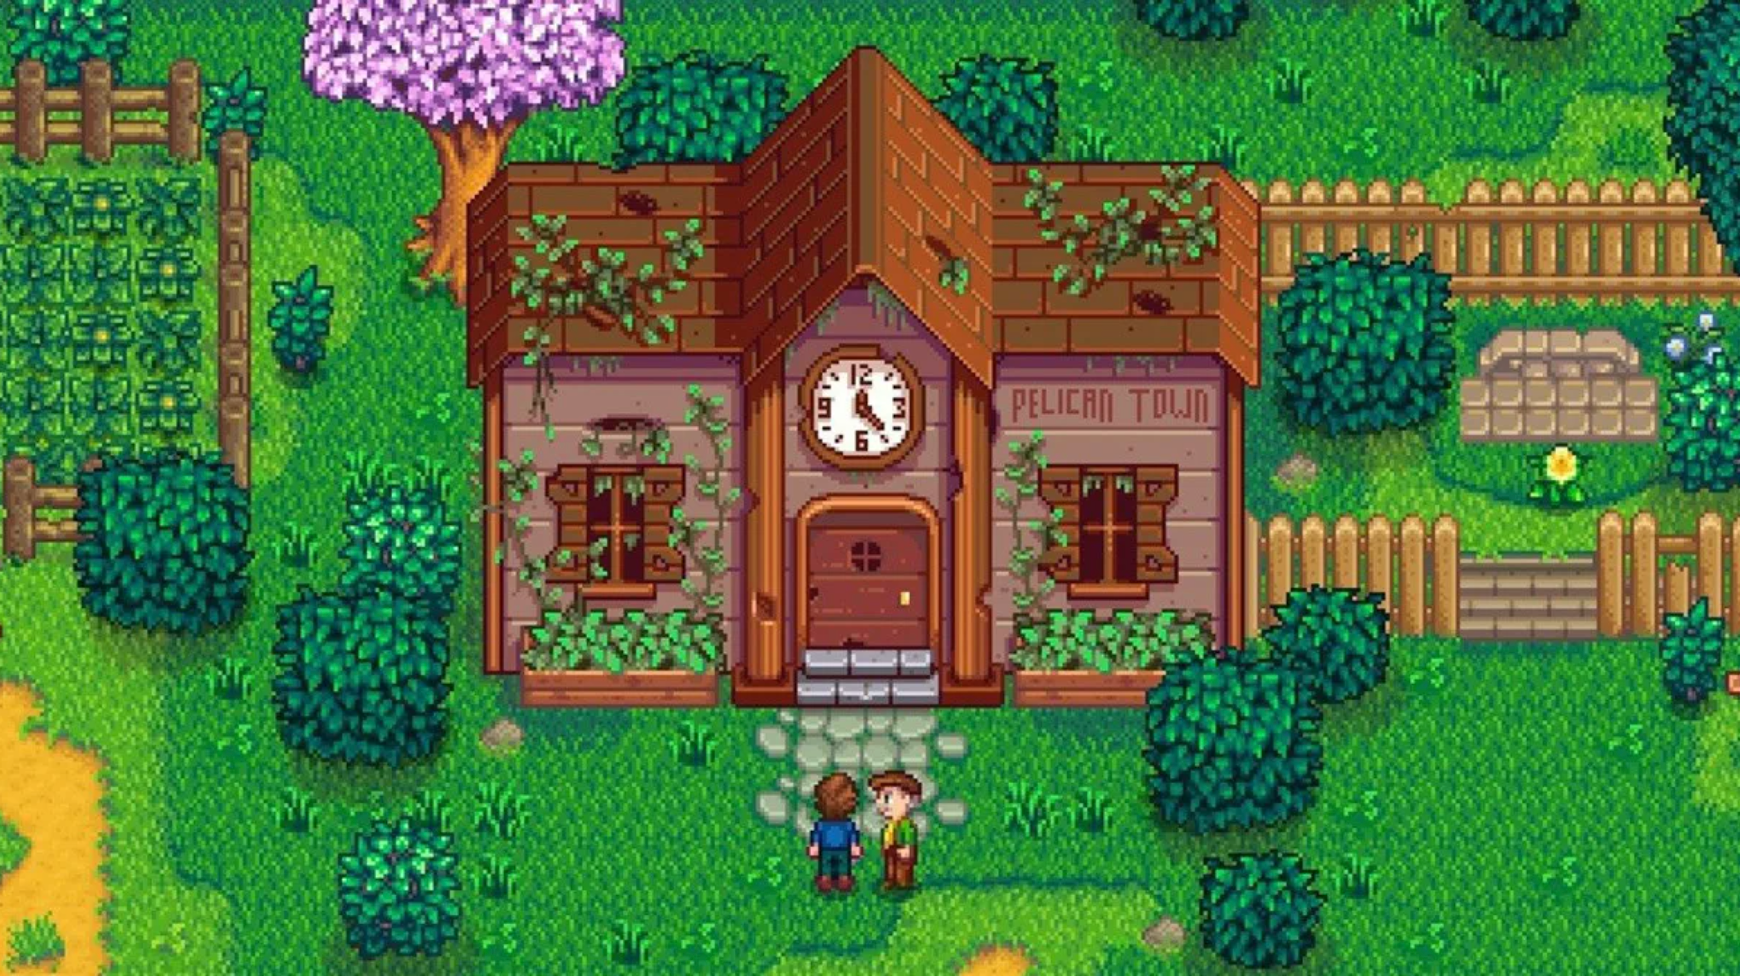 A Critical Play of Stardew Valley | by Gray Wong | Game Design Fundamentals  | Medium